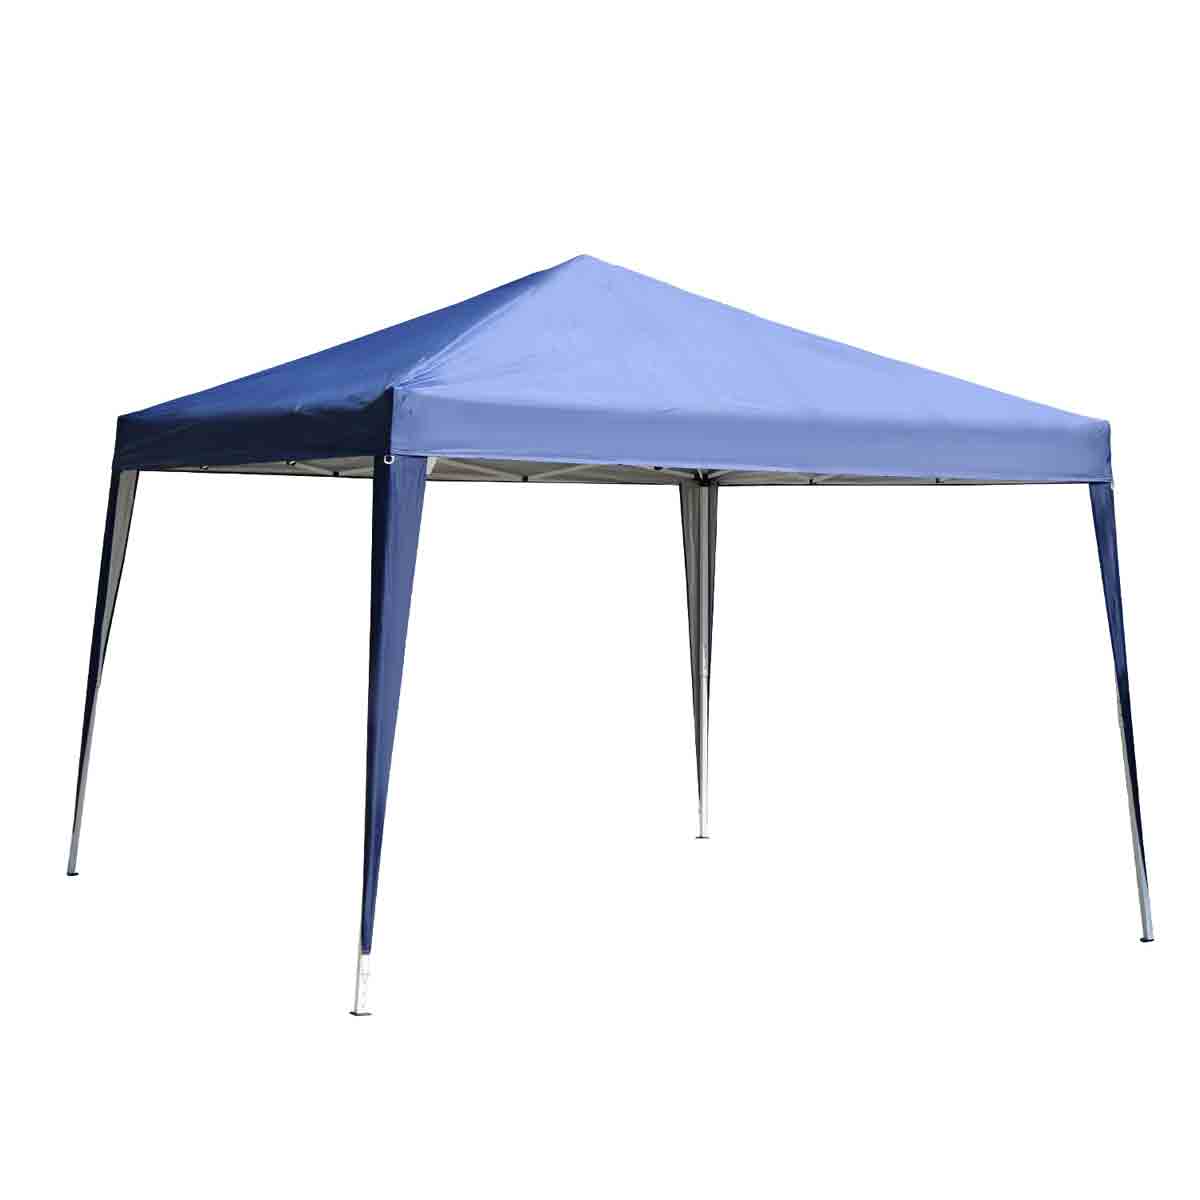 Outsunny 3 X 3M Garden Pop Up Gazebo Marquee Party Tent Wedding Canopy Blue